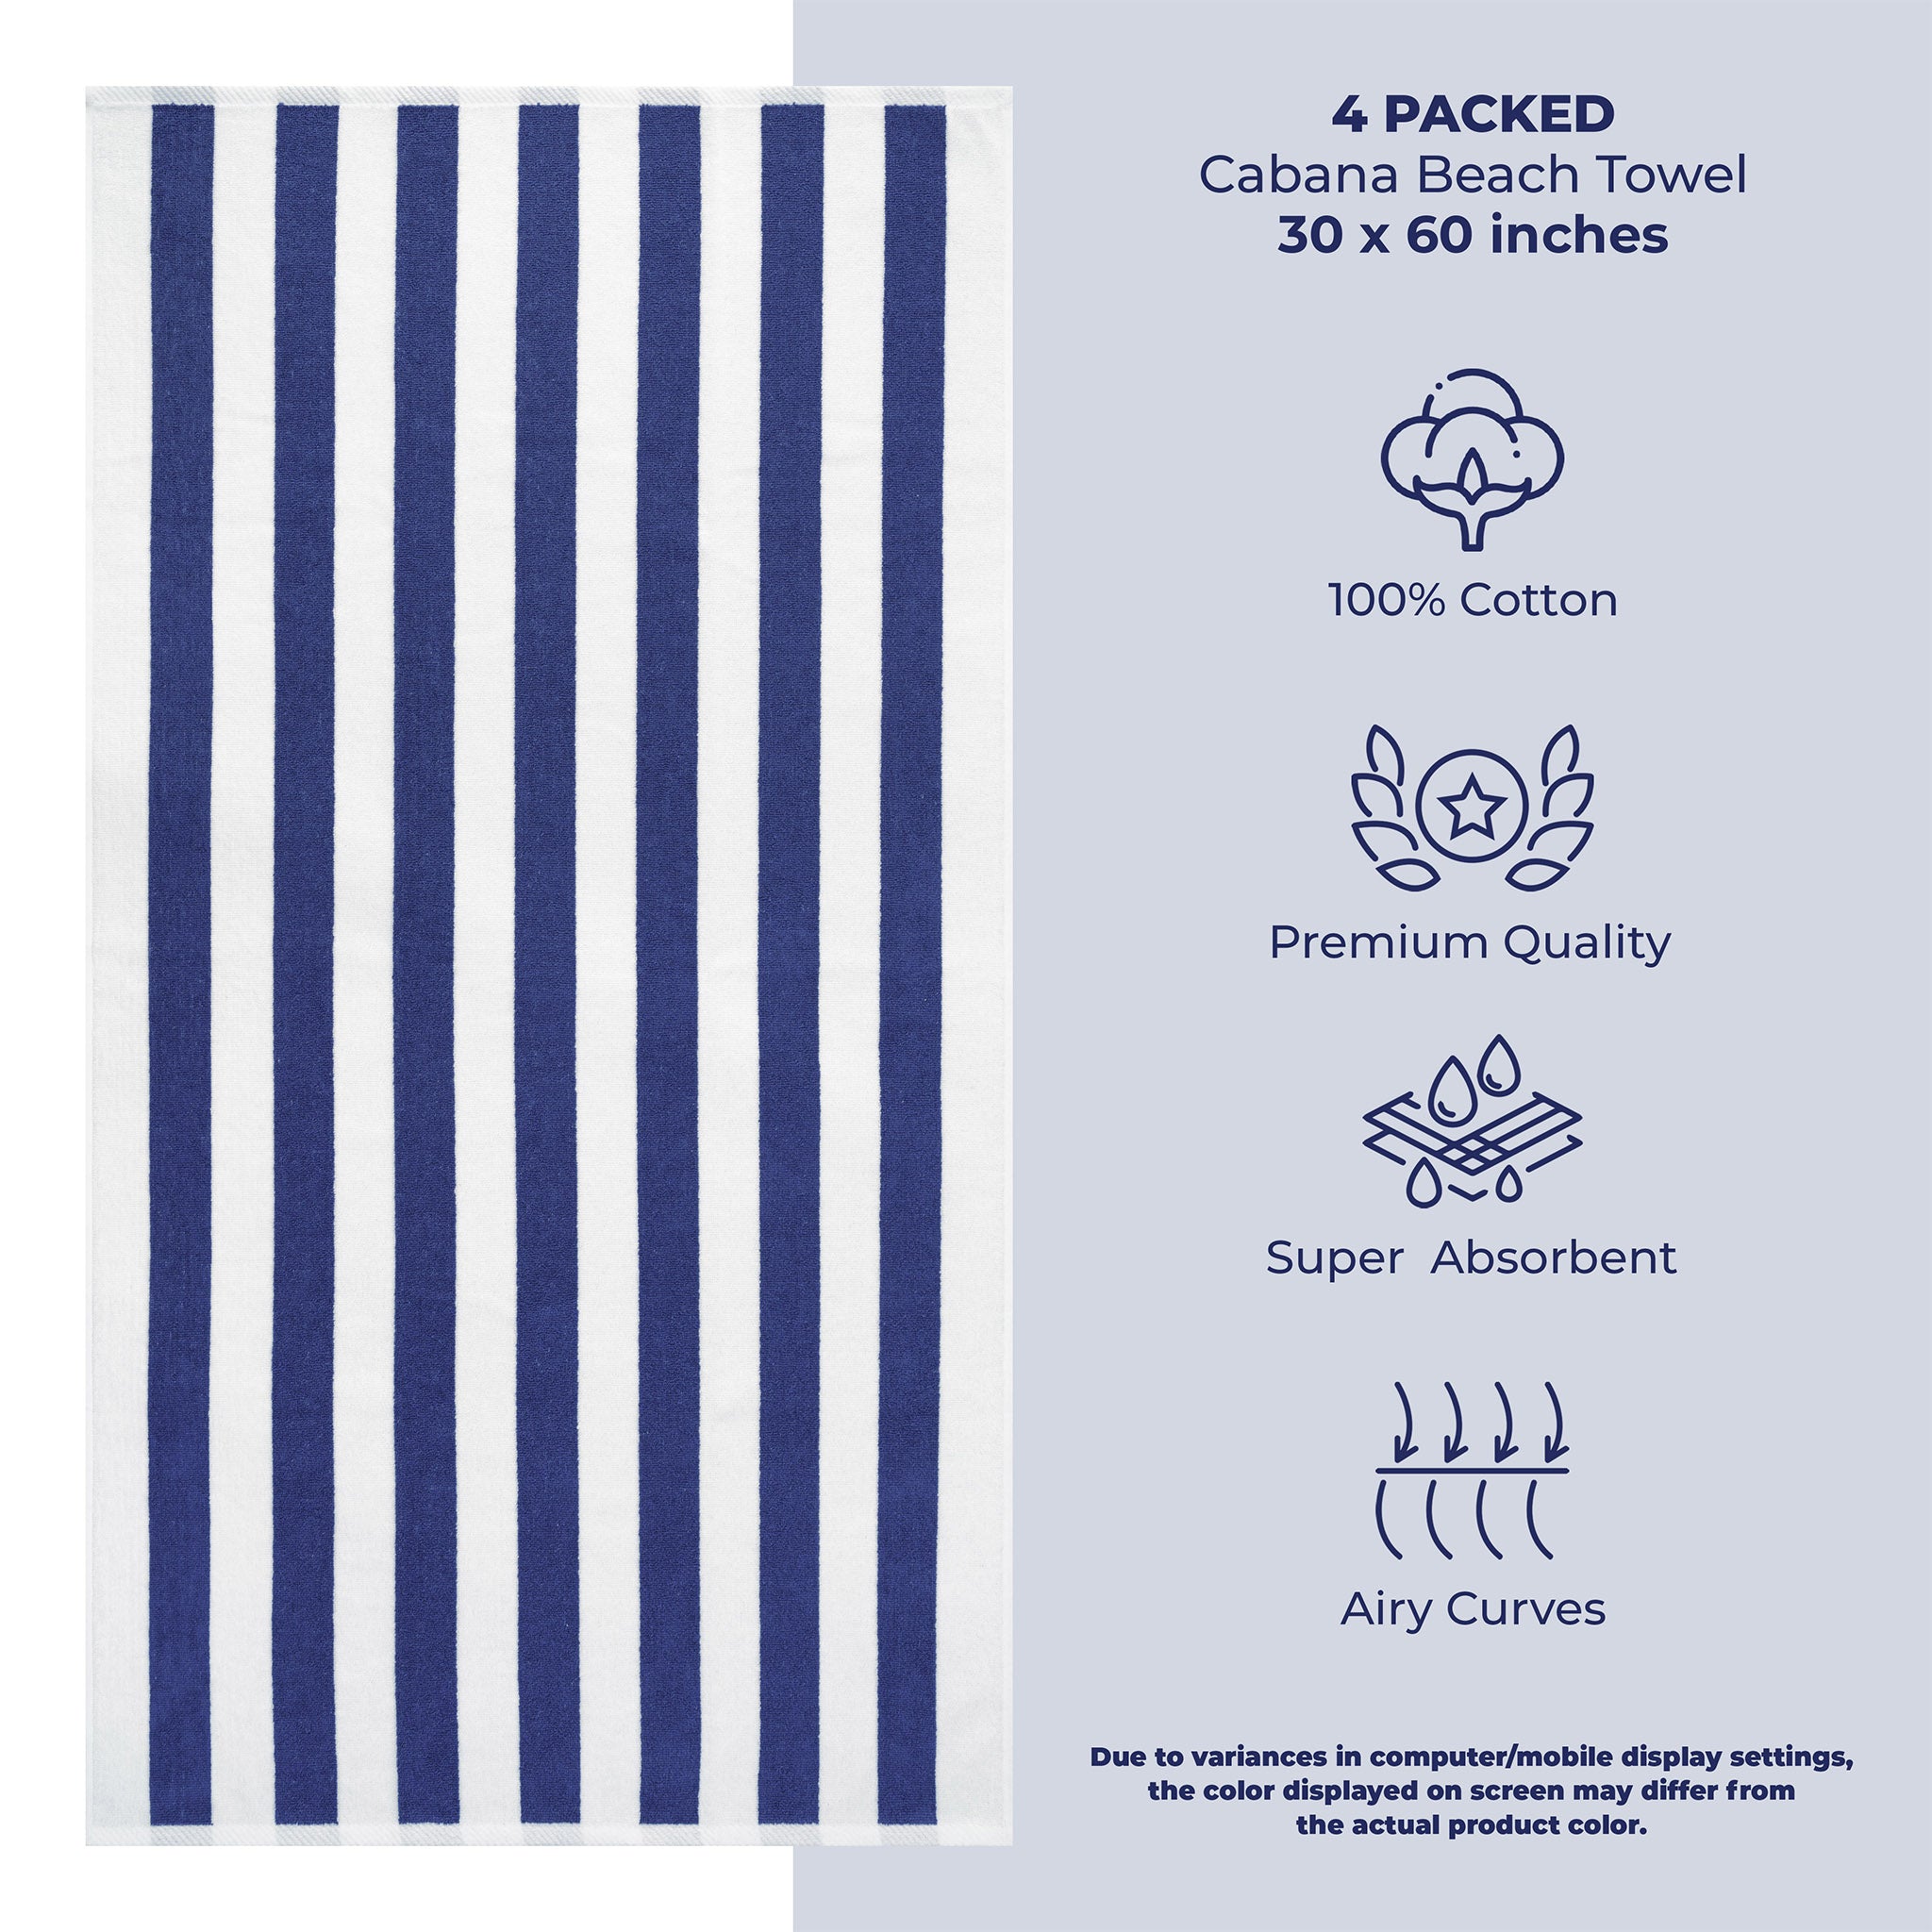 American Soft Linen 100% Cotton 4 Pack Beach Towels Cabana Striped Pool Towels -navy-blue-3